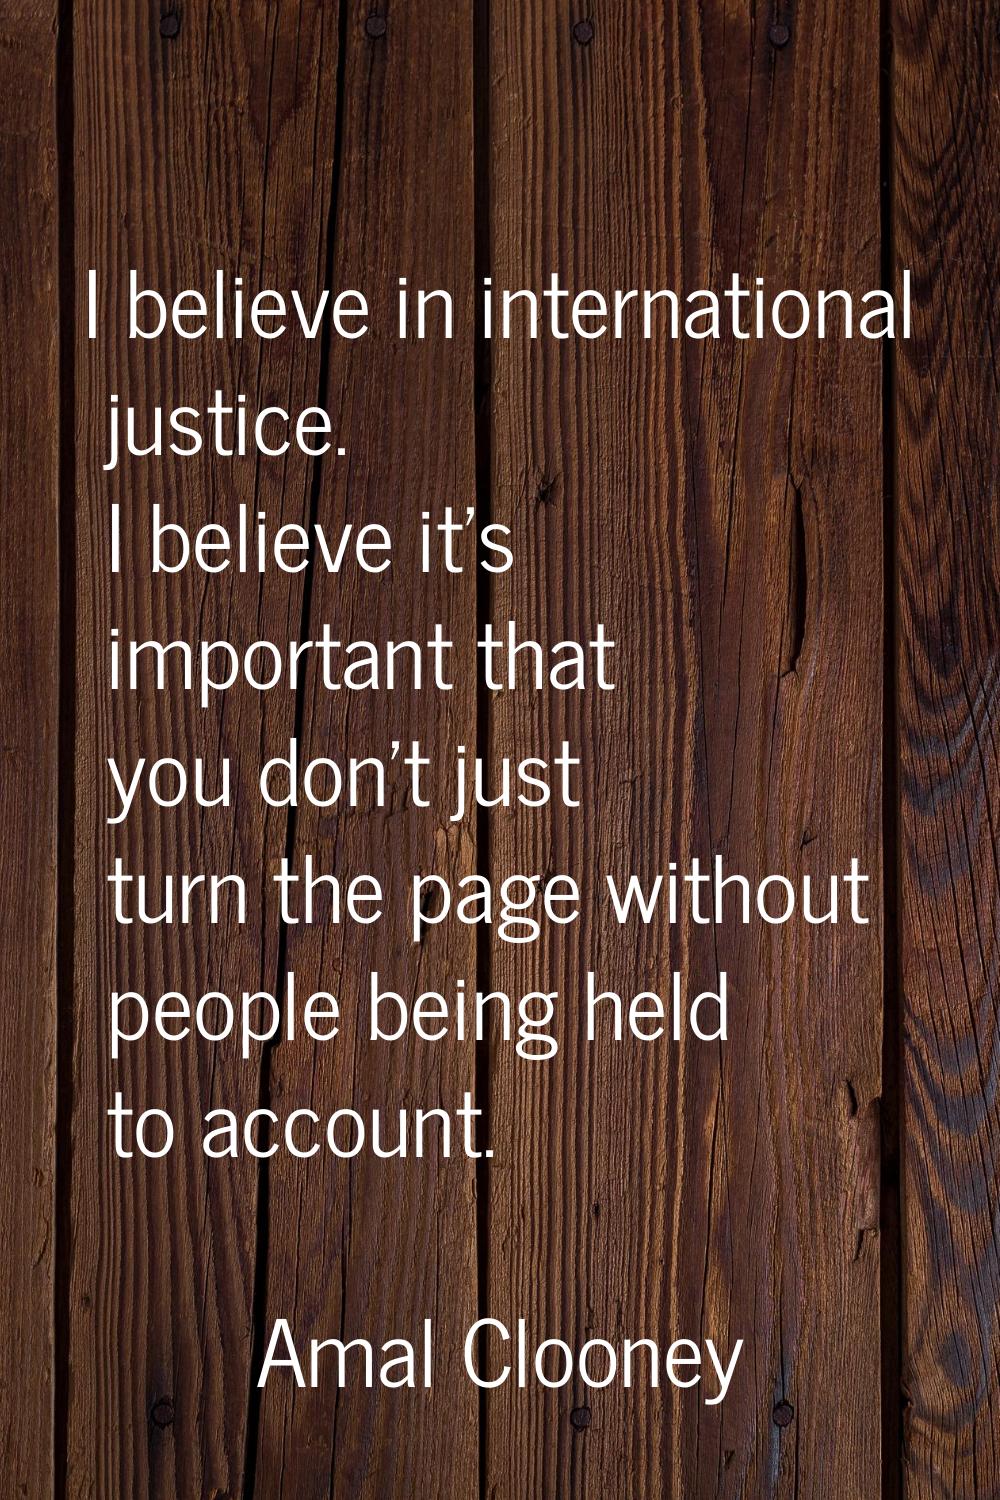 I believe in international justice. I believe it's important that you don't just turn the page with